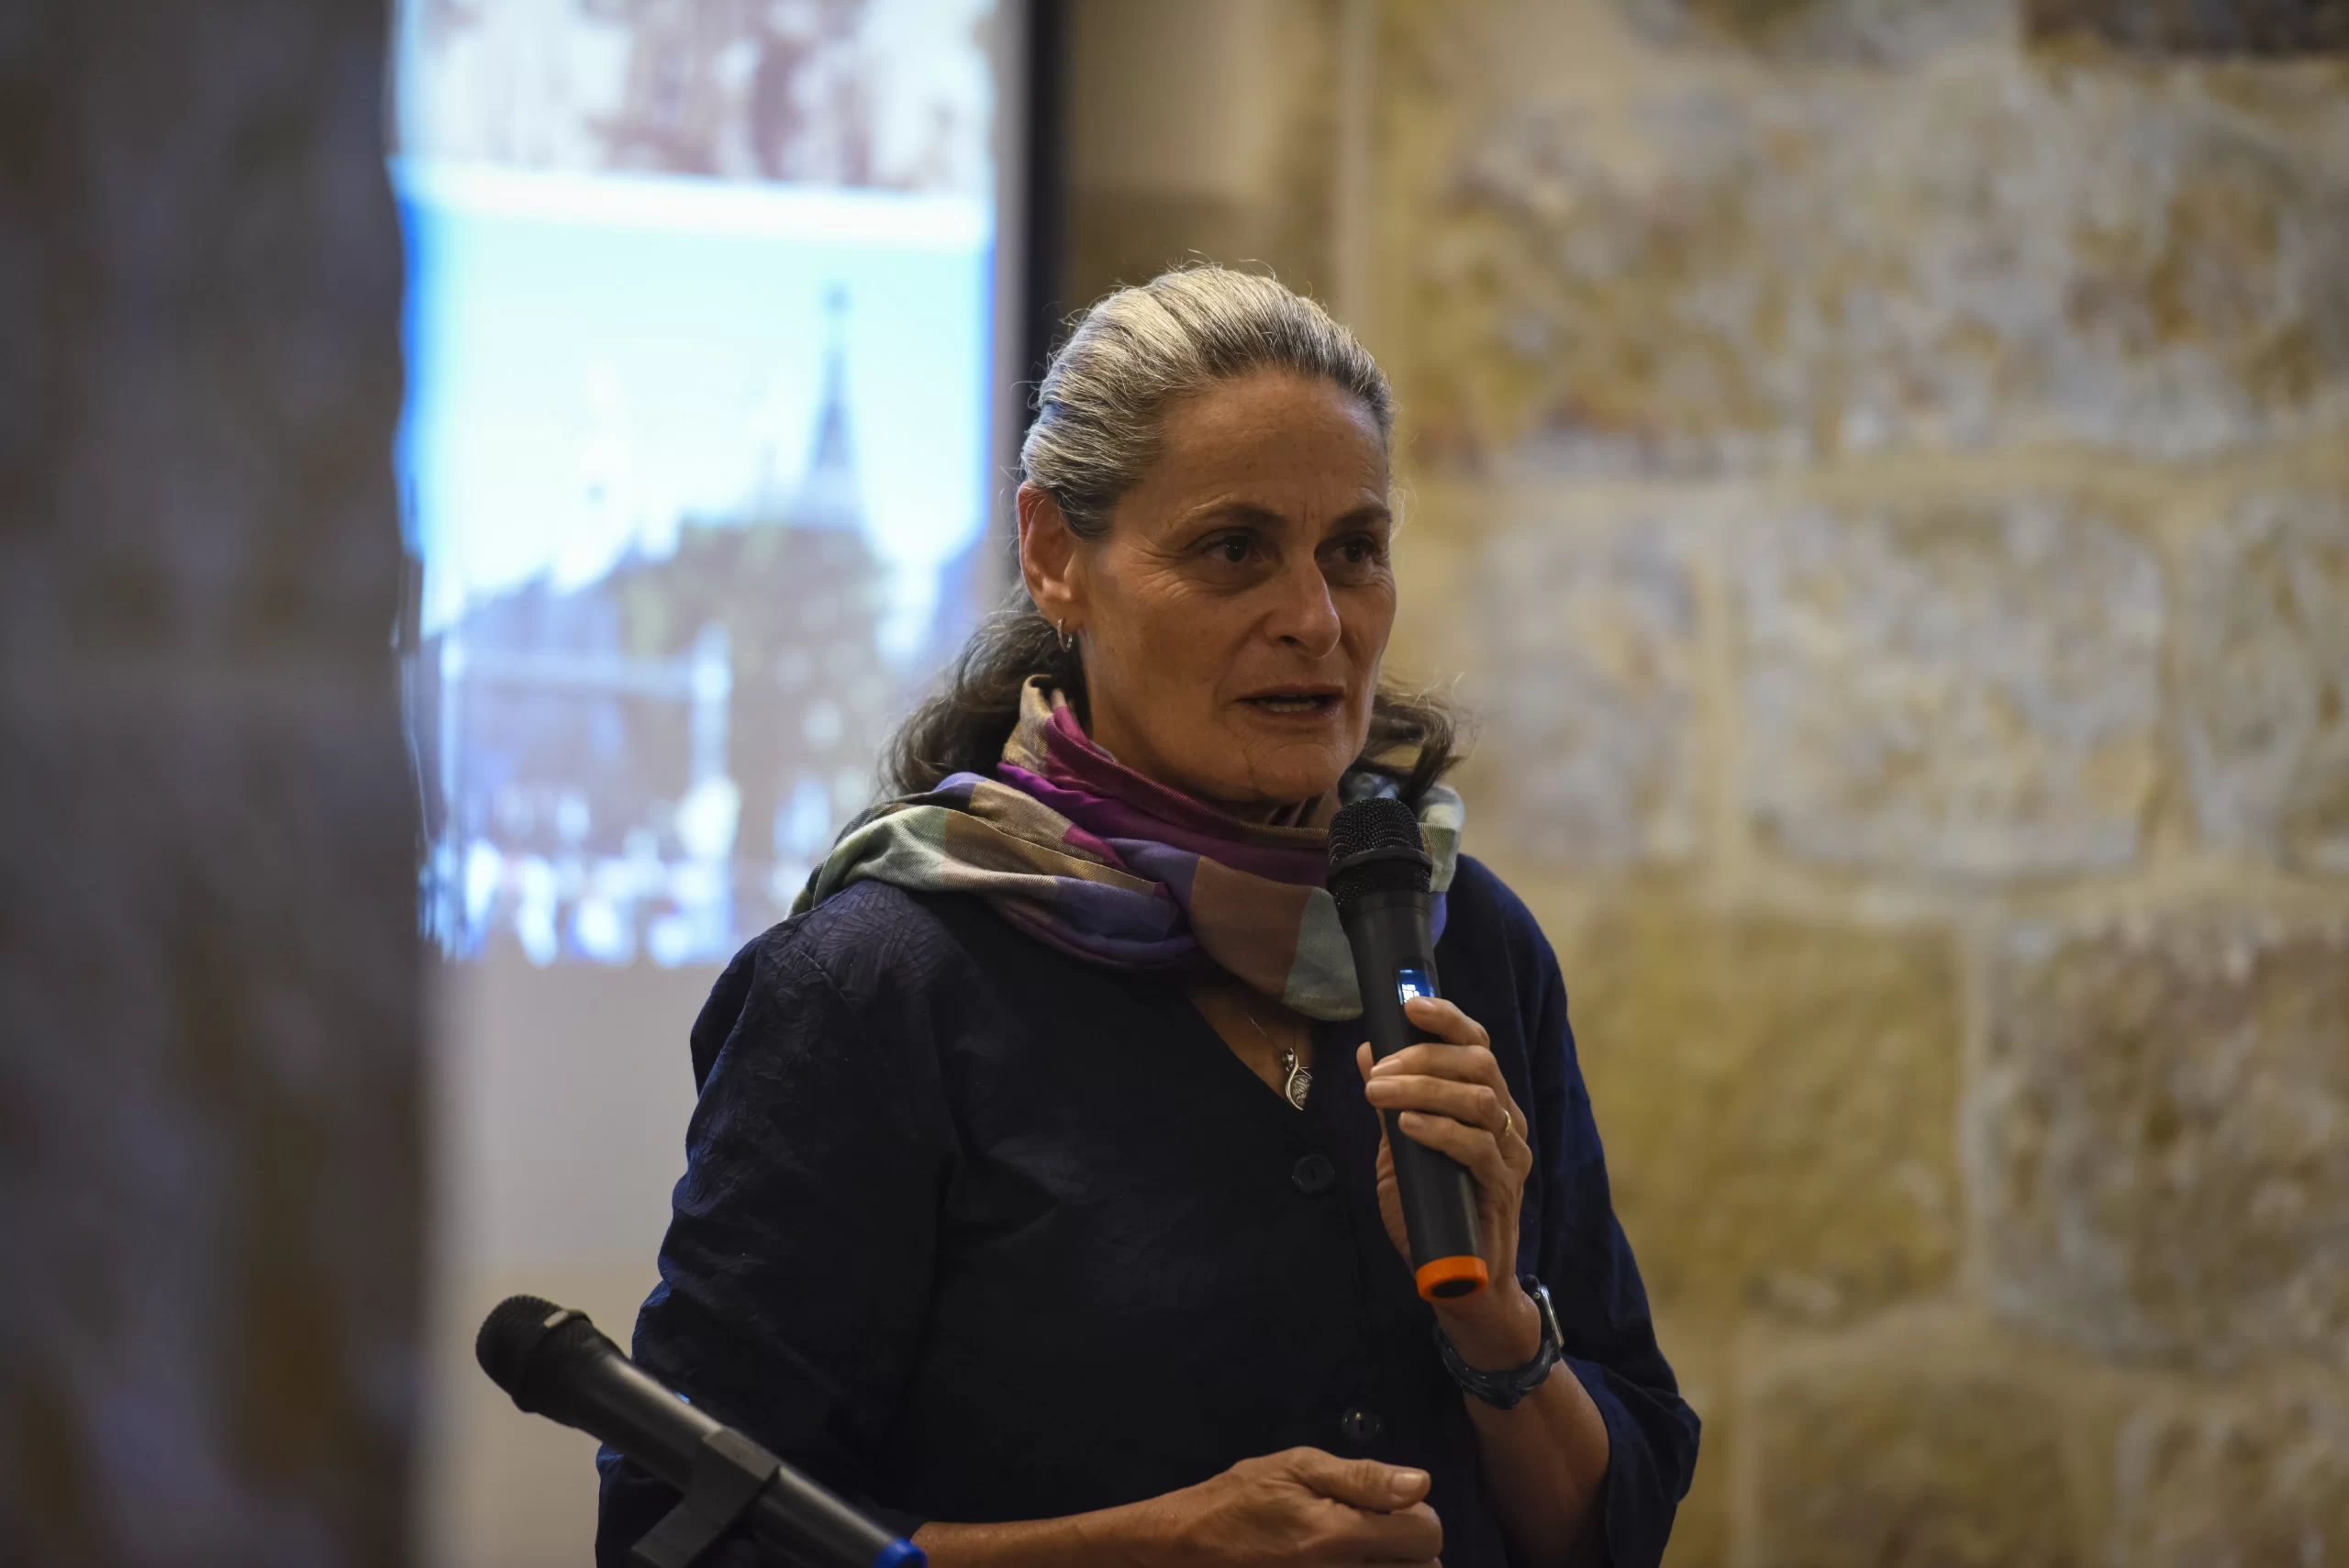 Yisca Harani at a conference in Ein Karem on Dec. 20, 2019, organized by the local Jewish community in collaboration with the Franciscan  convent of St. John. Credit: Nadim Asfour/Courtesy of Custody of the Holy Land